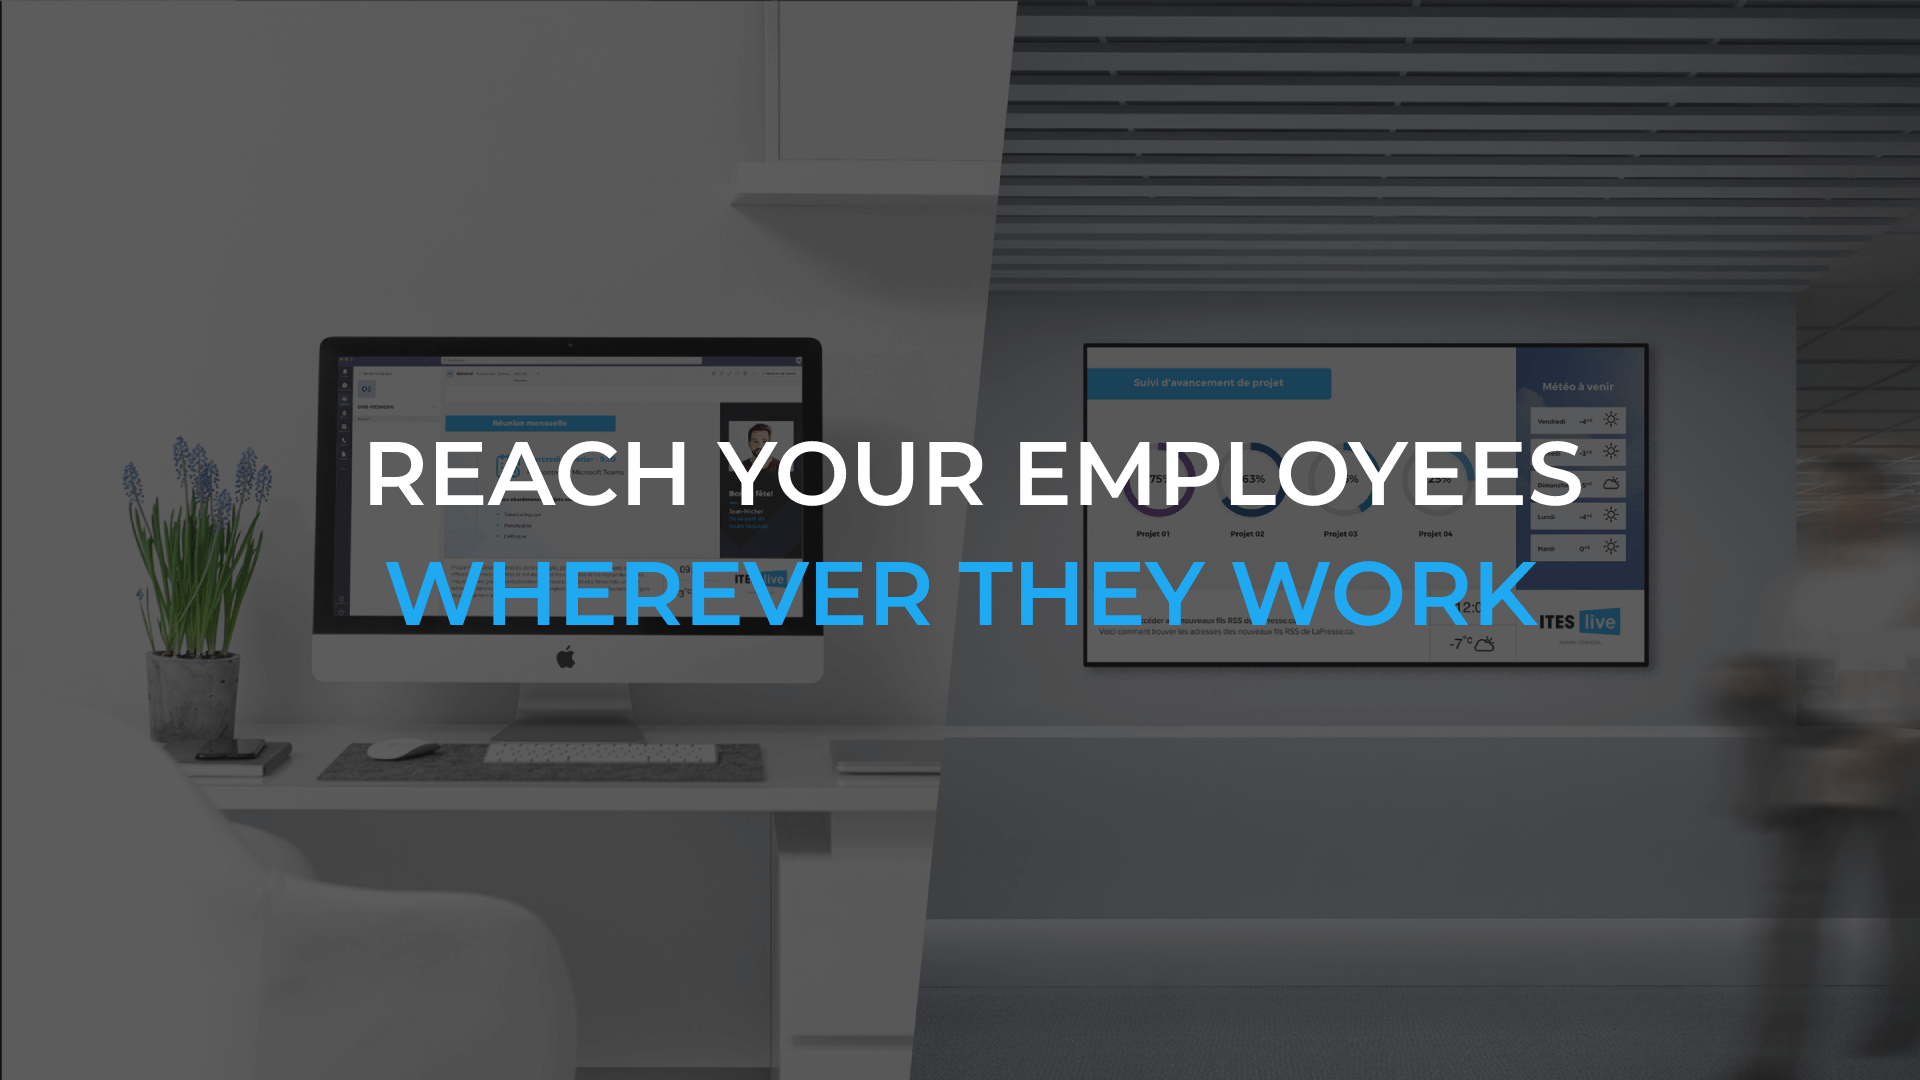 Internal communication - Reach your employees wherever they work